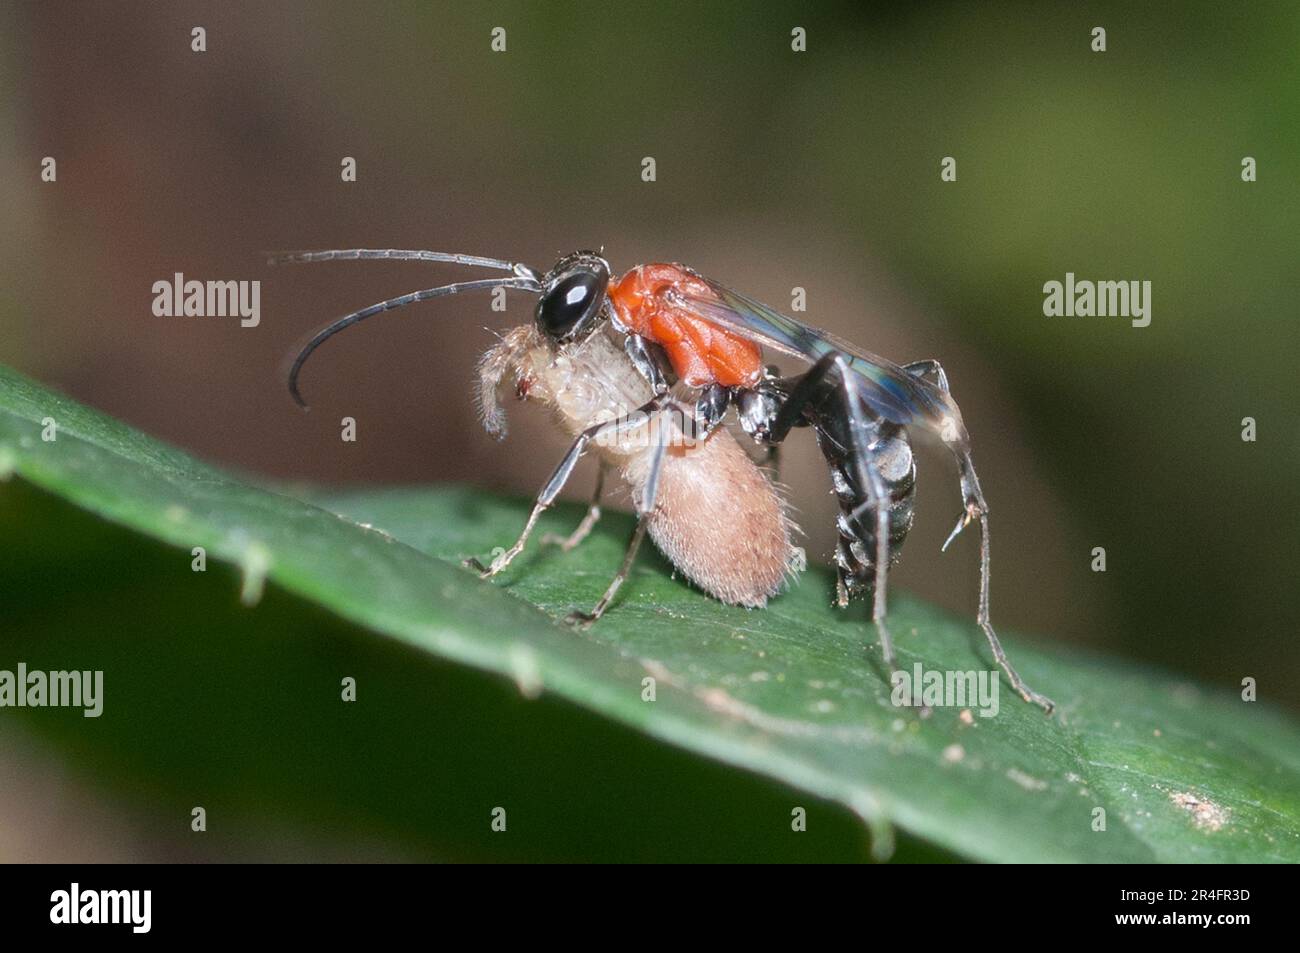 Female Spider Wasp, Pompilidae Family, with captured Jumping Spider, Salticidae Family, with legs amputated, Klungkung, Bali, Indonesia Stock Photo